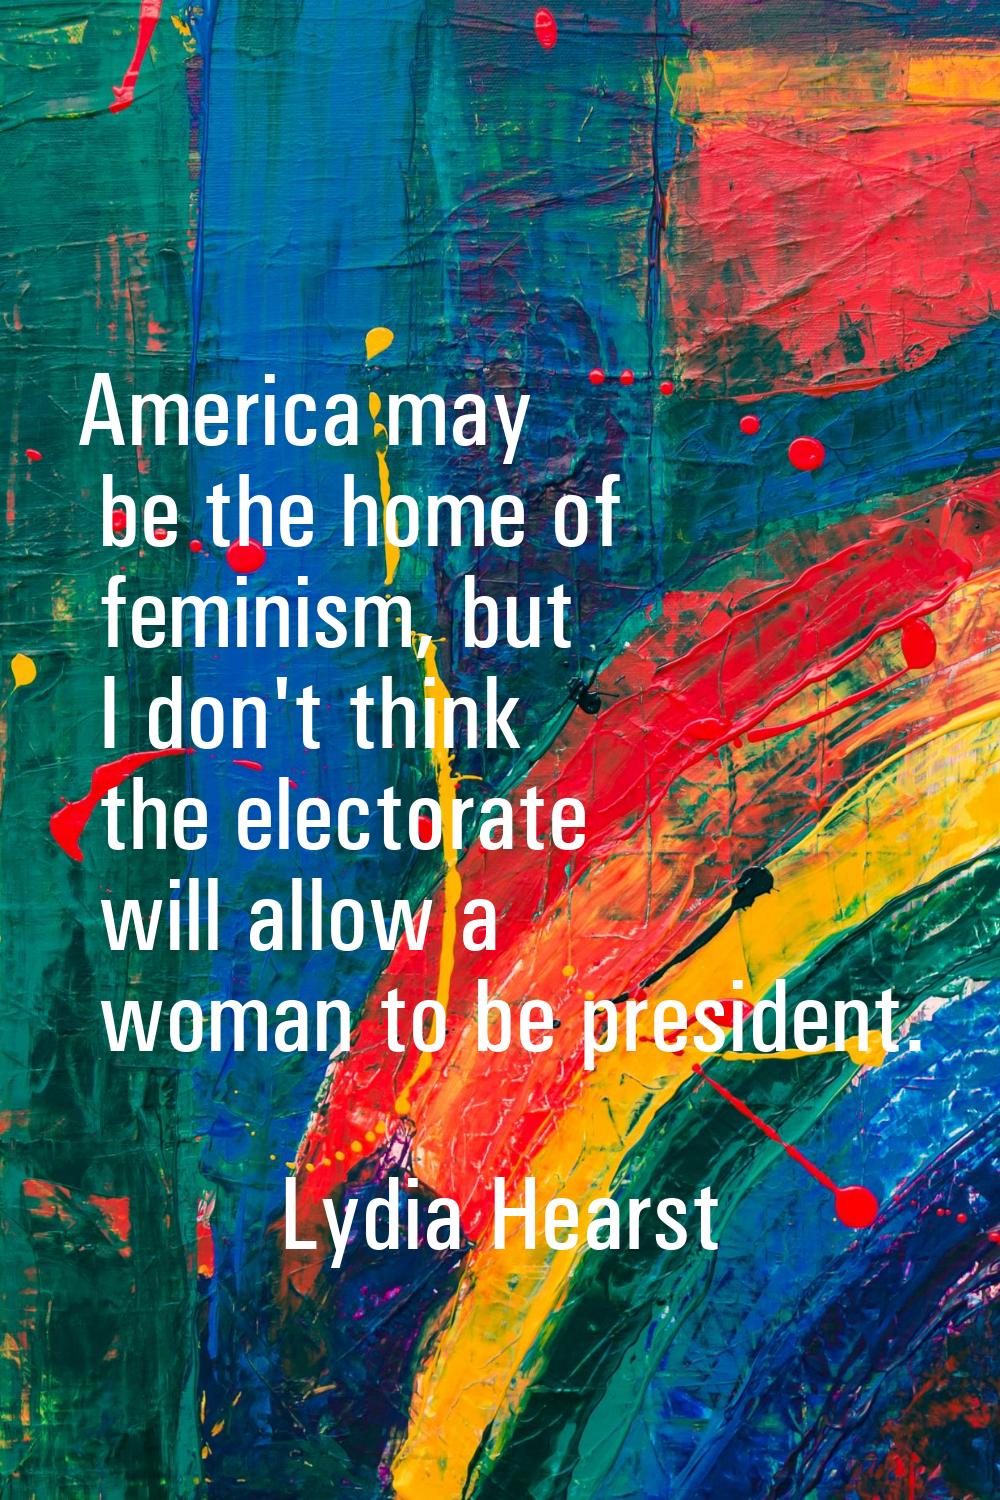 America may be the home of feminism, but I don't think the electorate will allow a woman to be pres